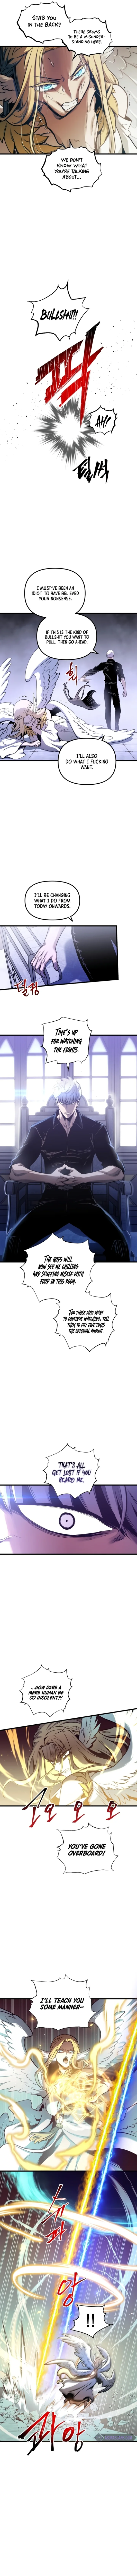 Reincarnation of the Suicidal Battle God - Chapter 83 Page 7